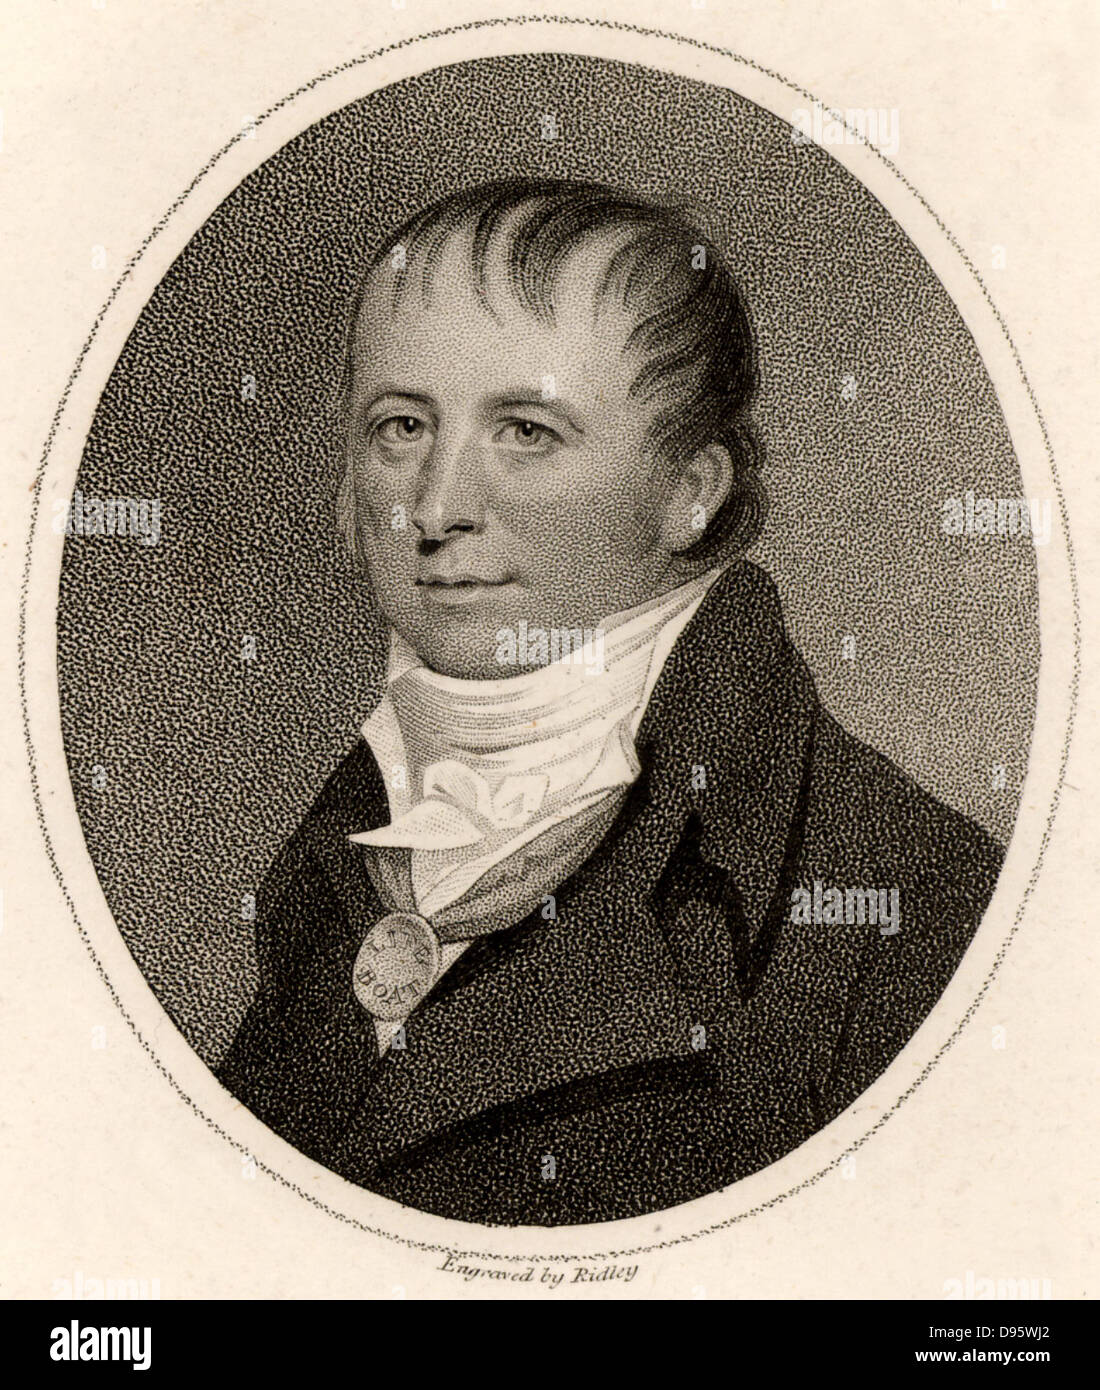 Henry Greathead (1757-1816) born in Richmond, Yorkshire. English boatbuilder who had a boatyard at South Shields, Tyne and Wear, England, where in 1790 he built 'The Original', the first specially designed lifeboat. Stipple engraving from 'The European Magazine' (London, 1804). Stock Photo